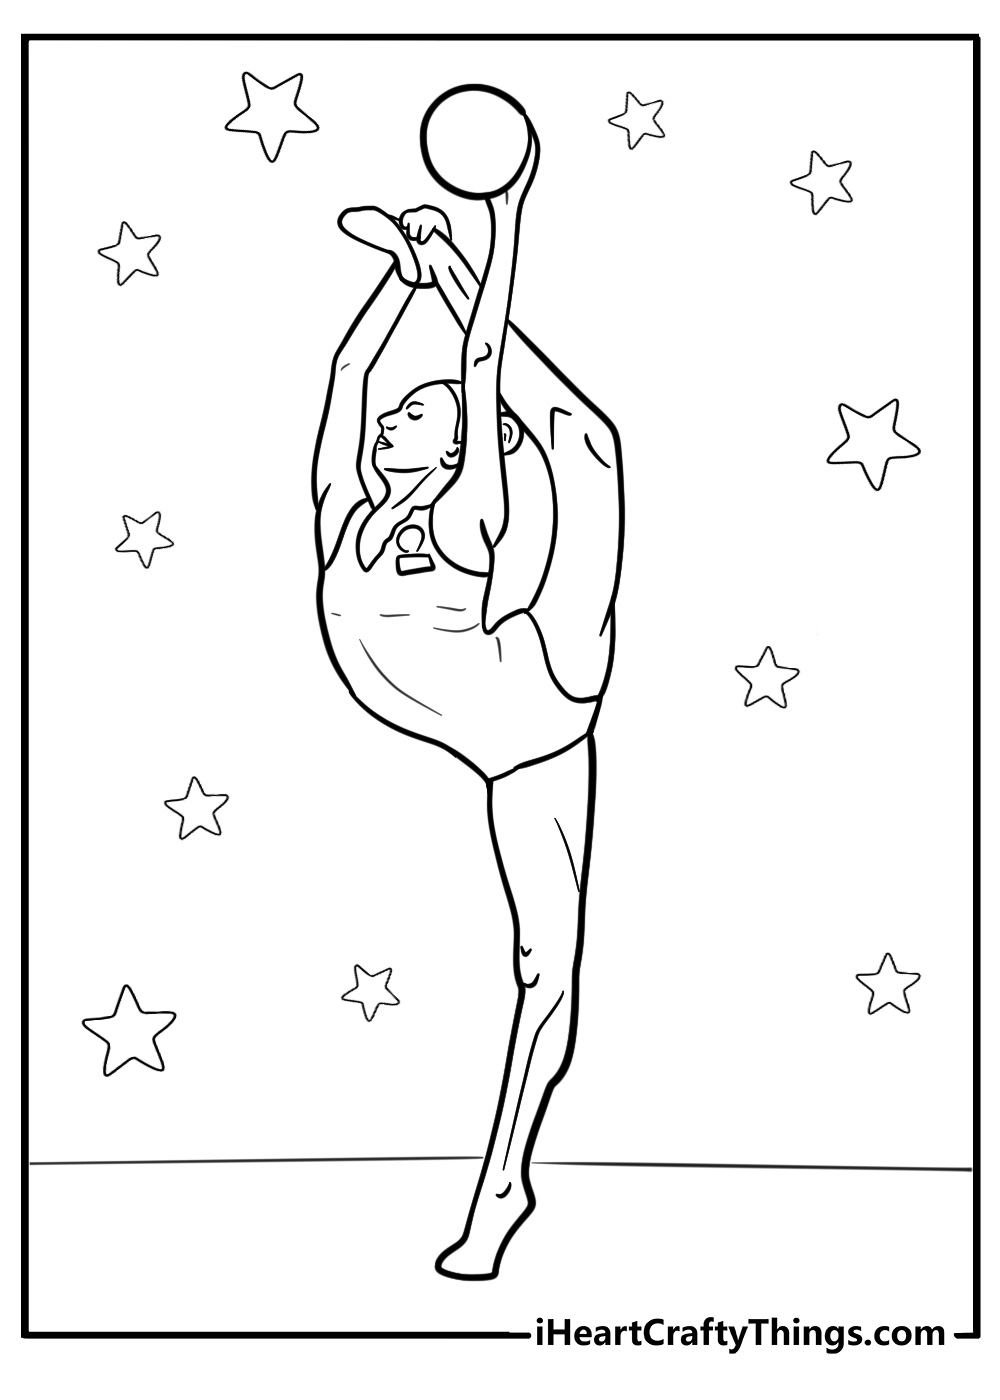 Gymnastics coloring page of rhythmic gymnast performing with ball